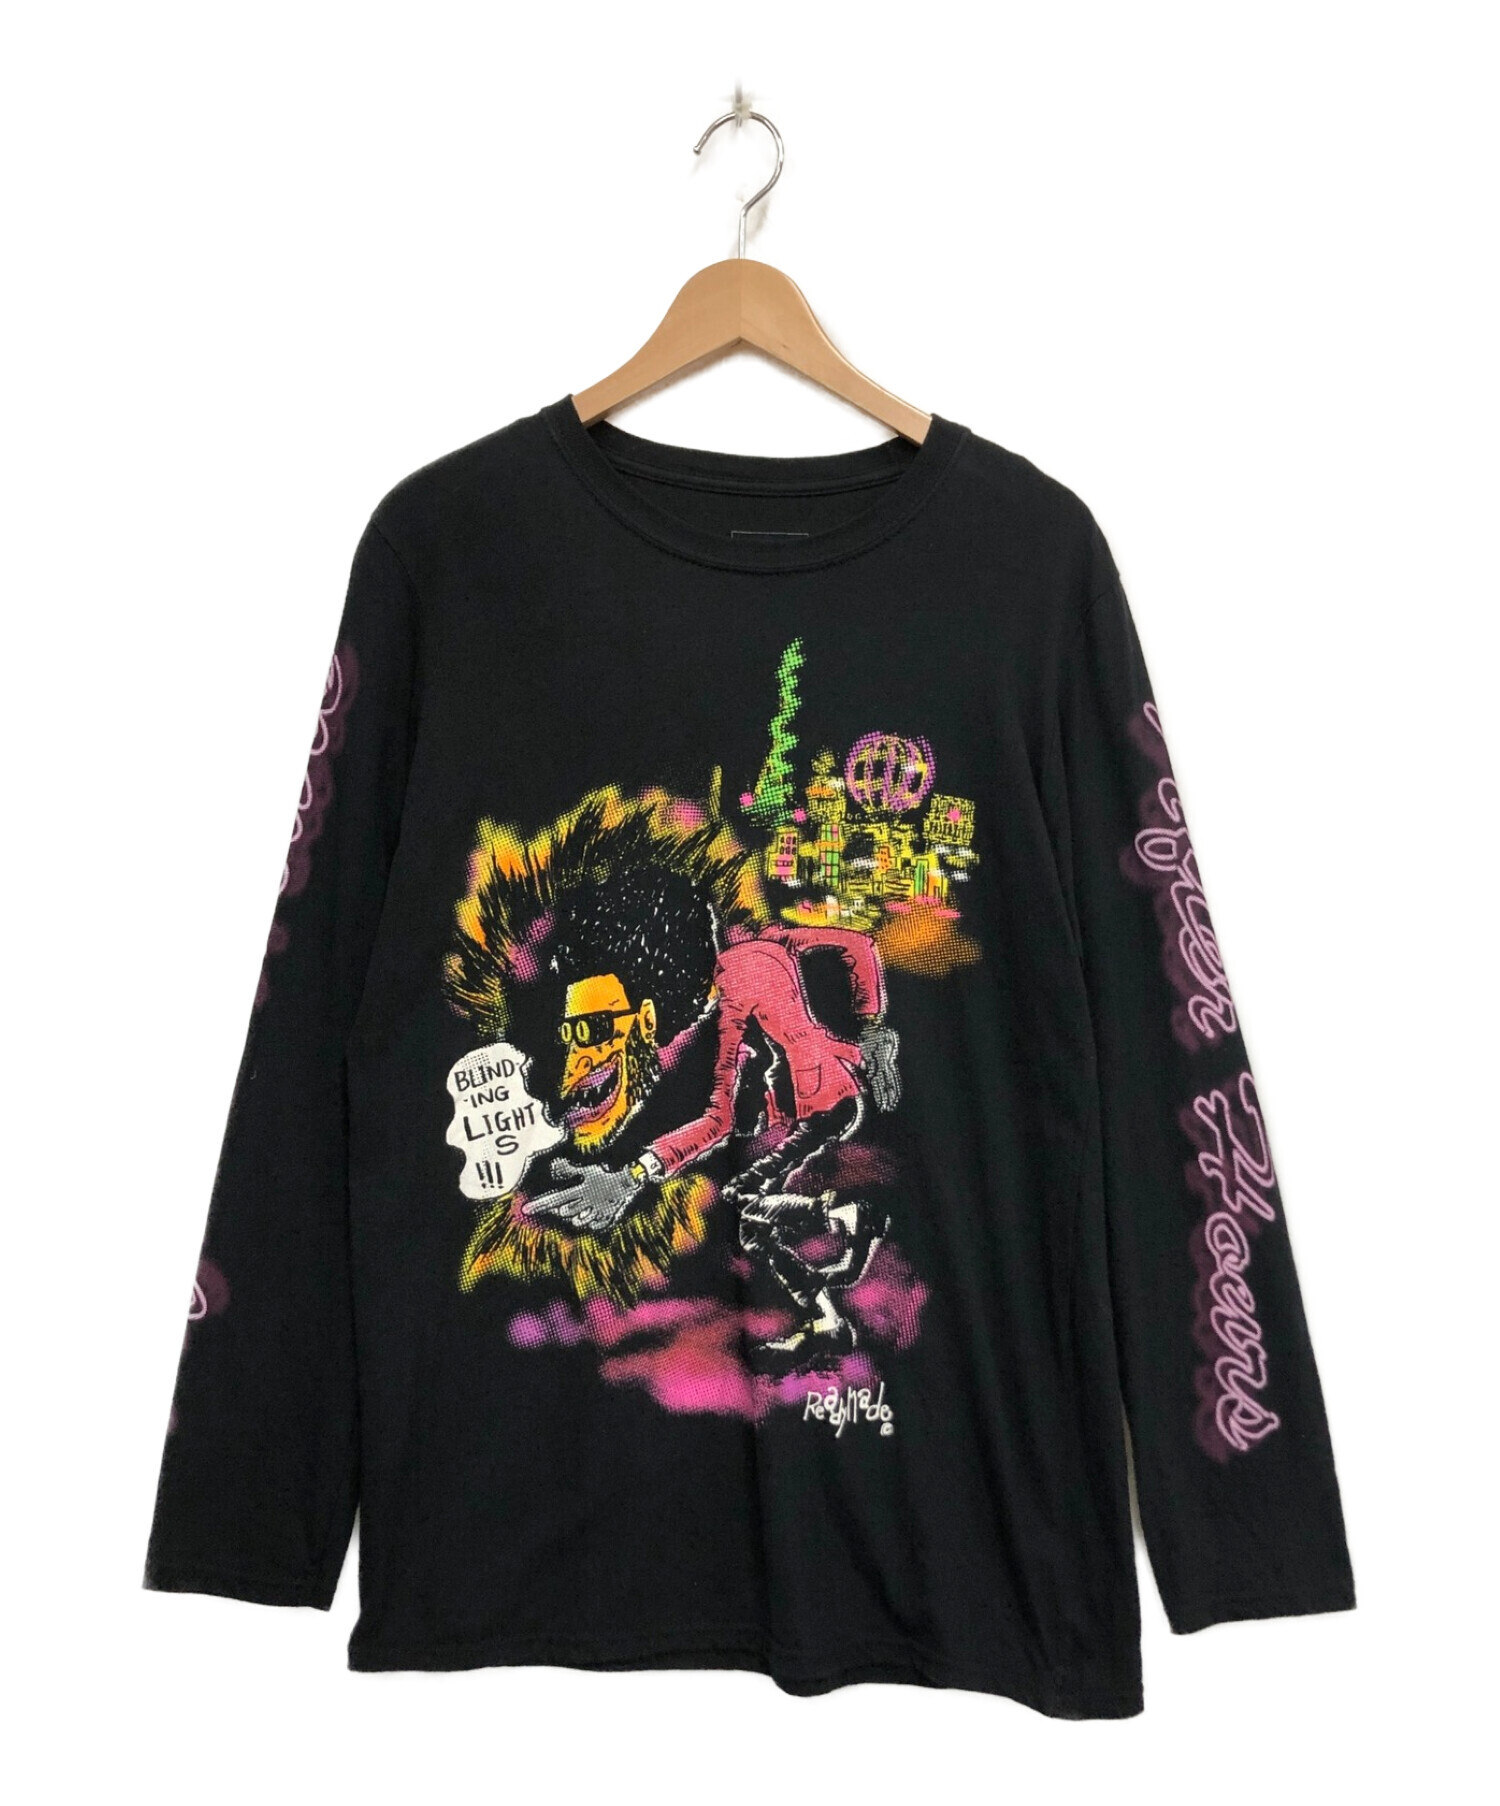 READYMADE×The Weeknd ロングスリーブTシャツ - トップス